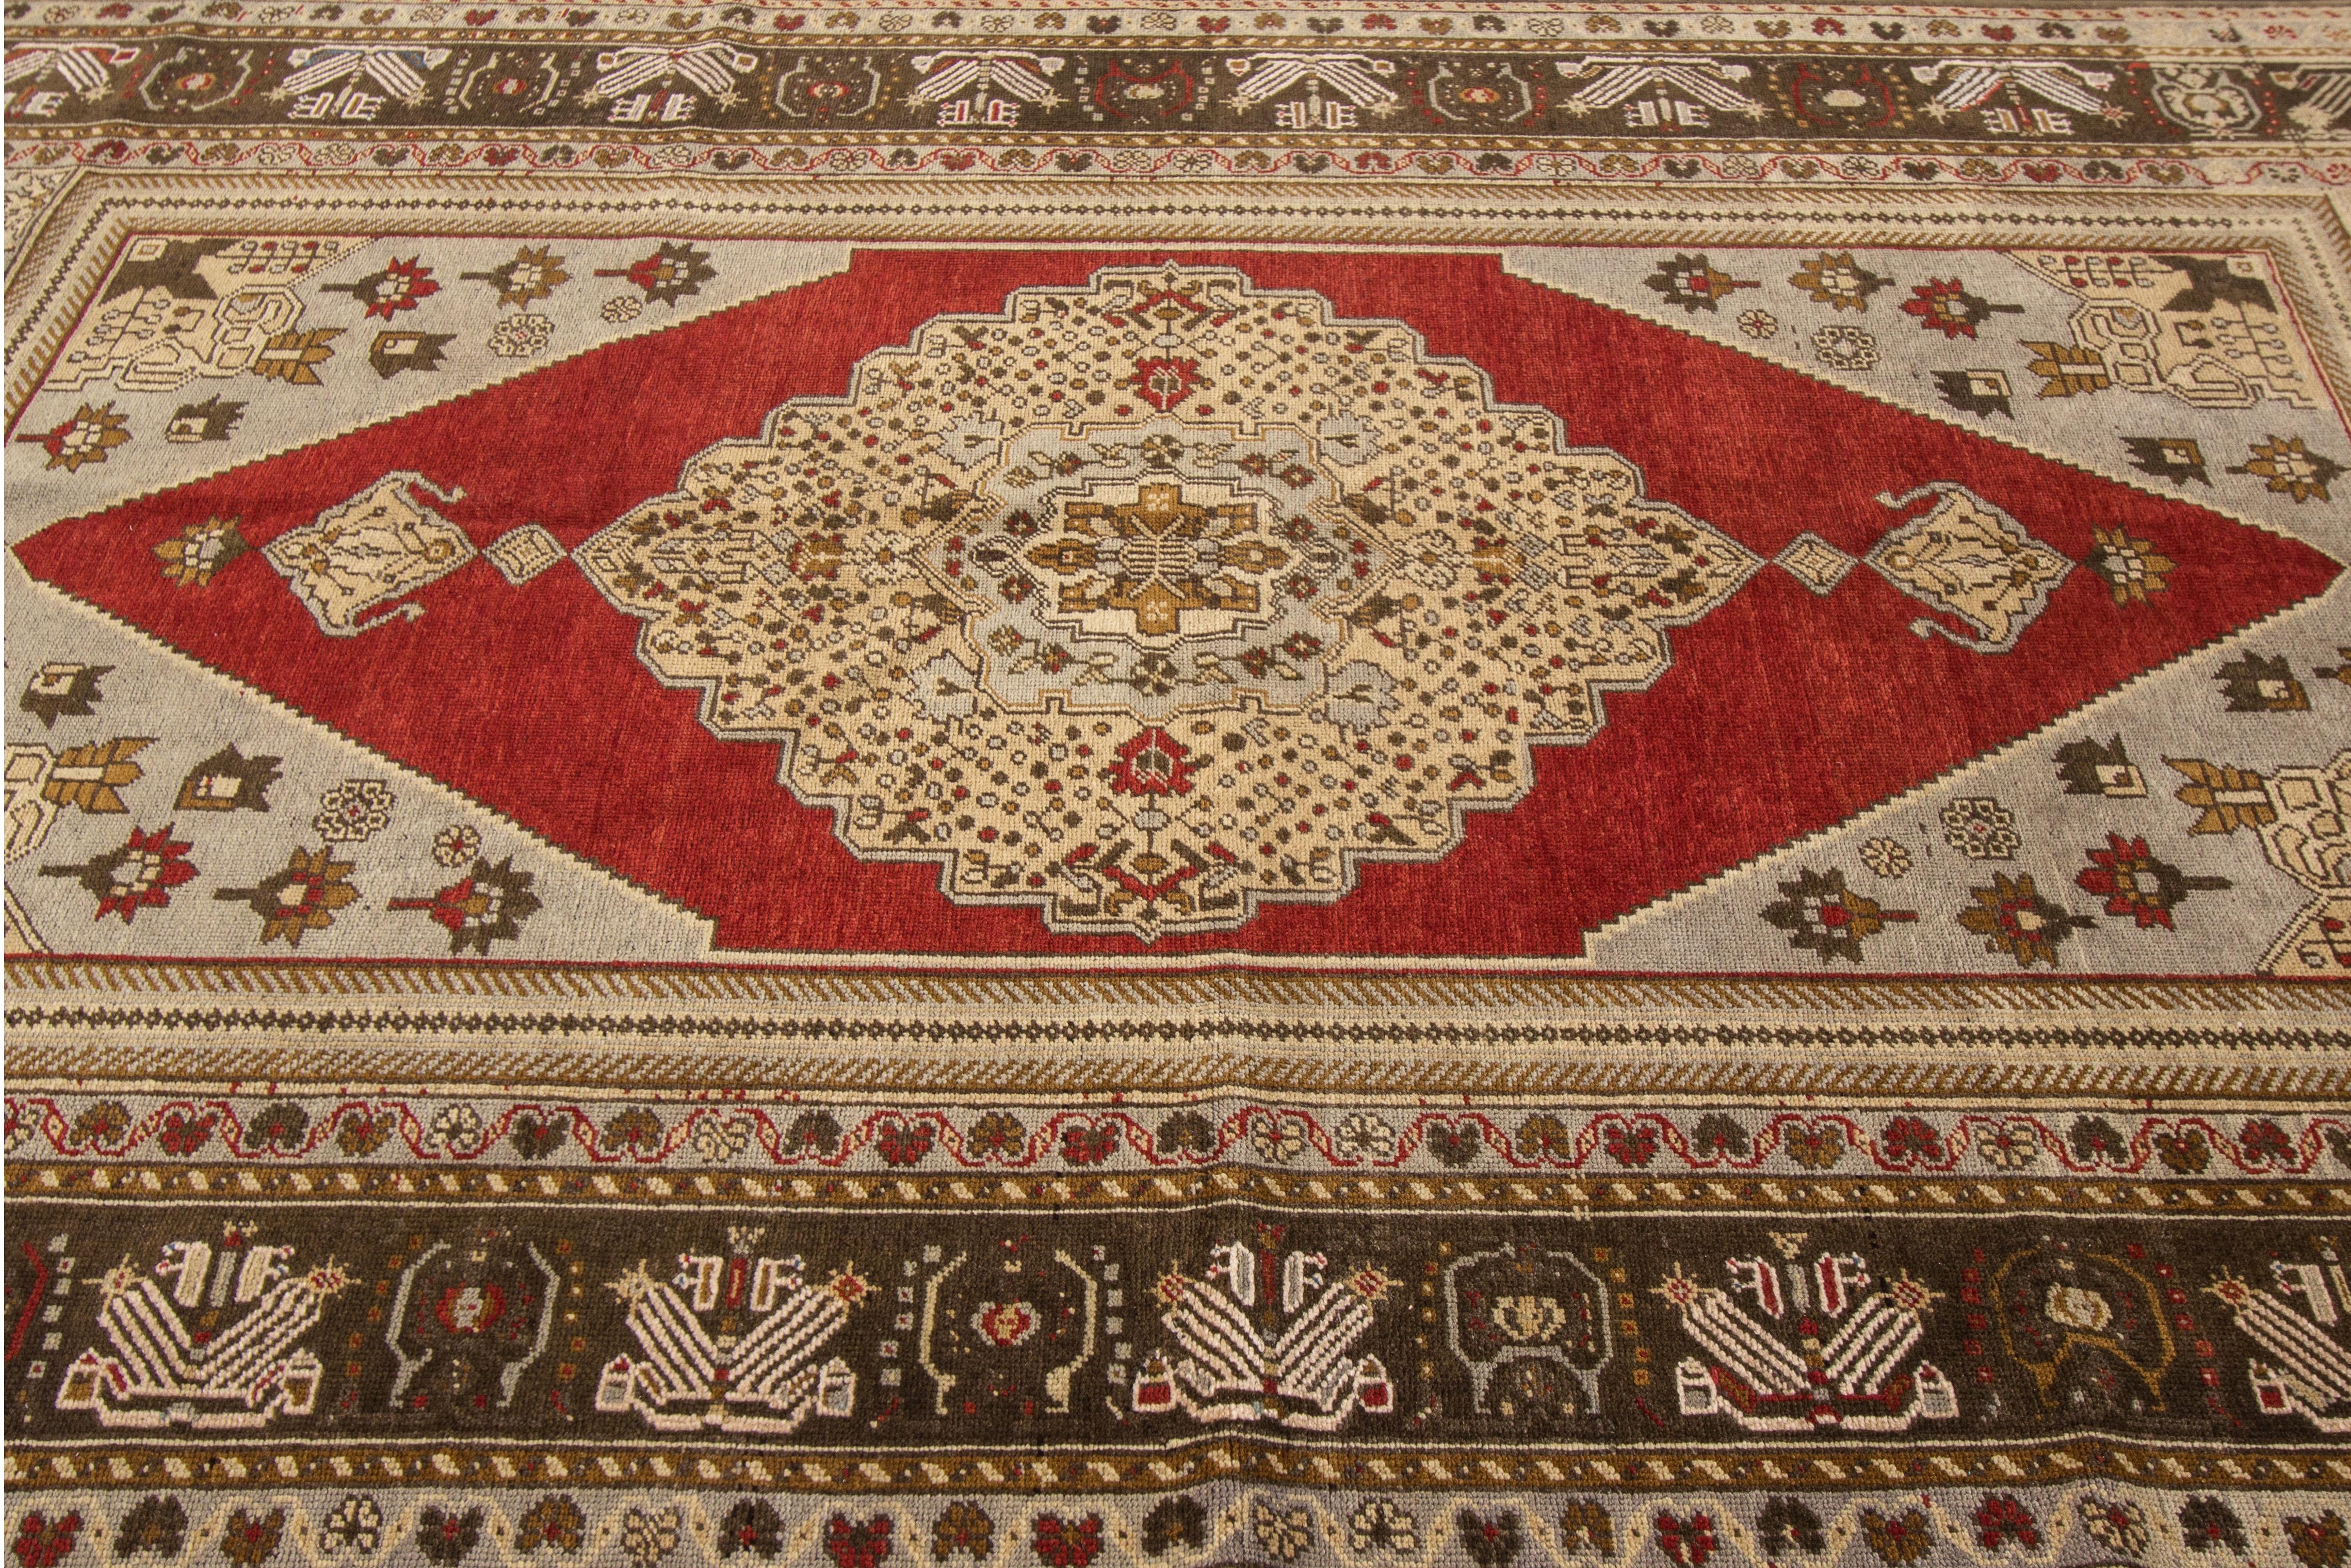 A hand knotted 1920s antique Khotan rug with a red and beige medallion design. This rug measures 6' x 9'2